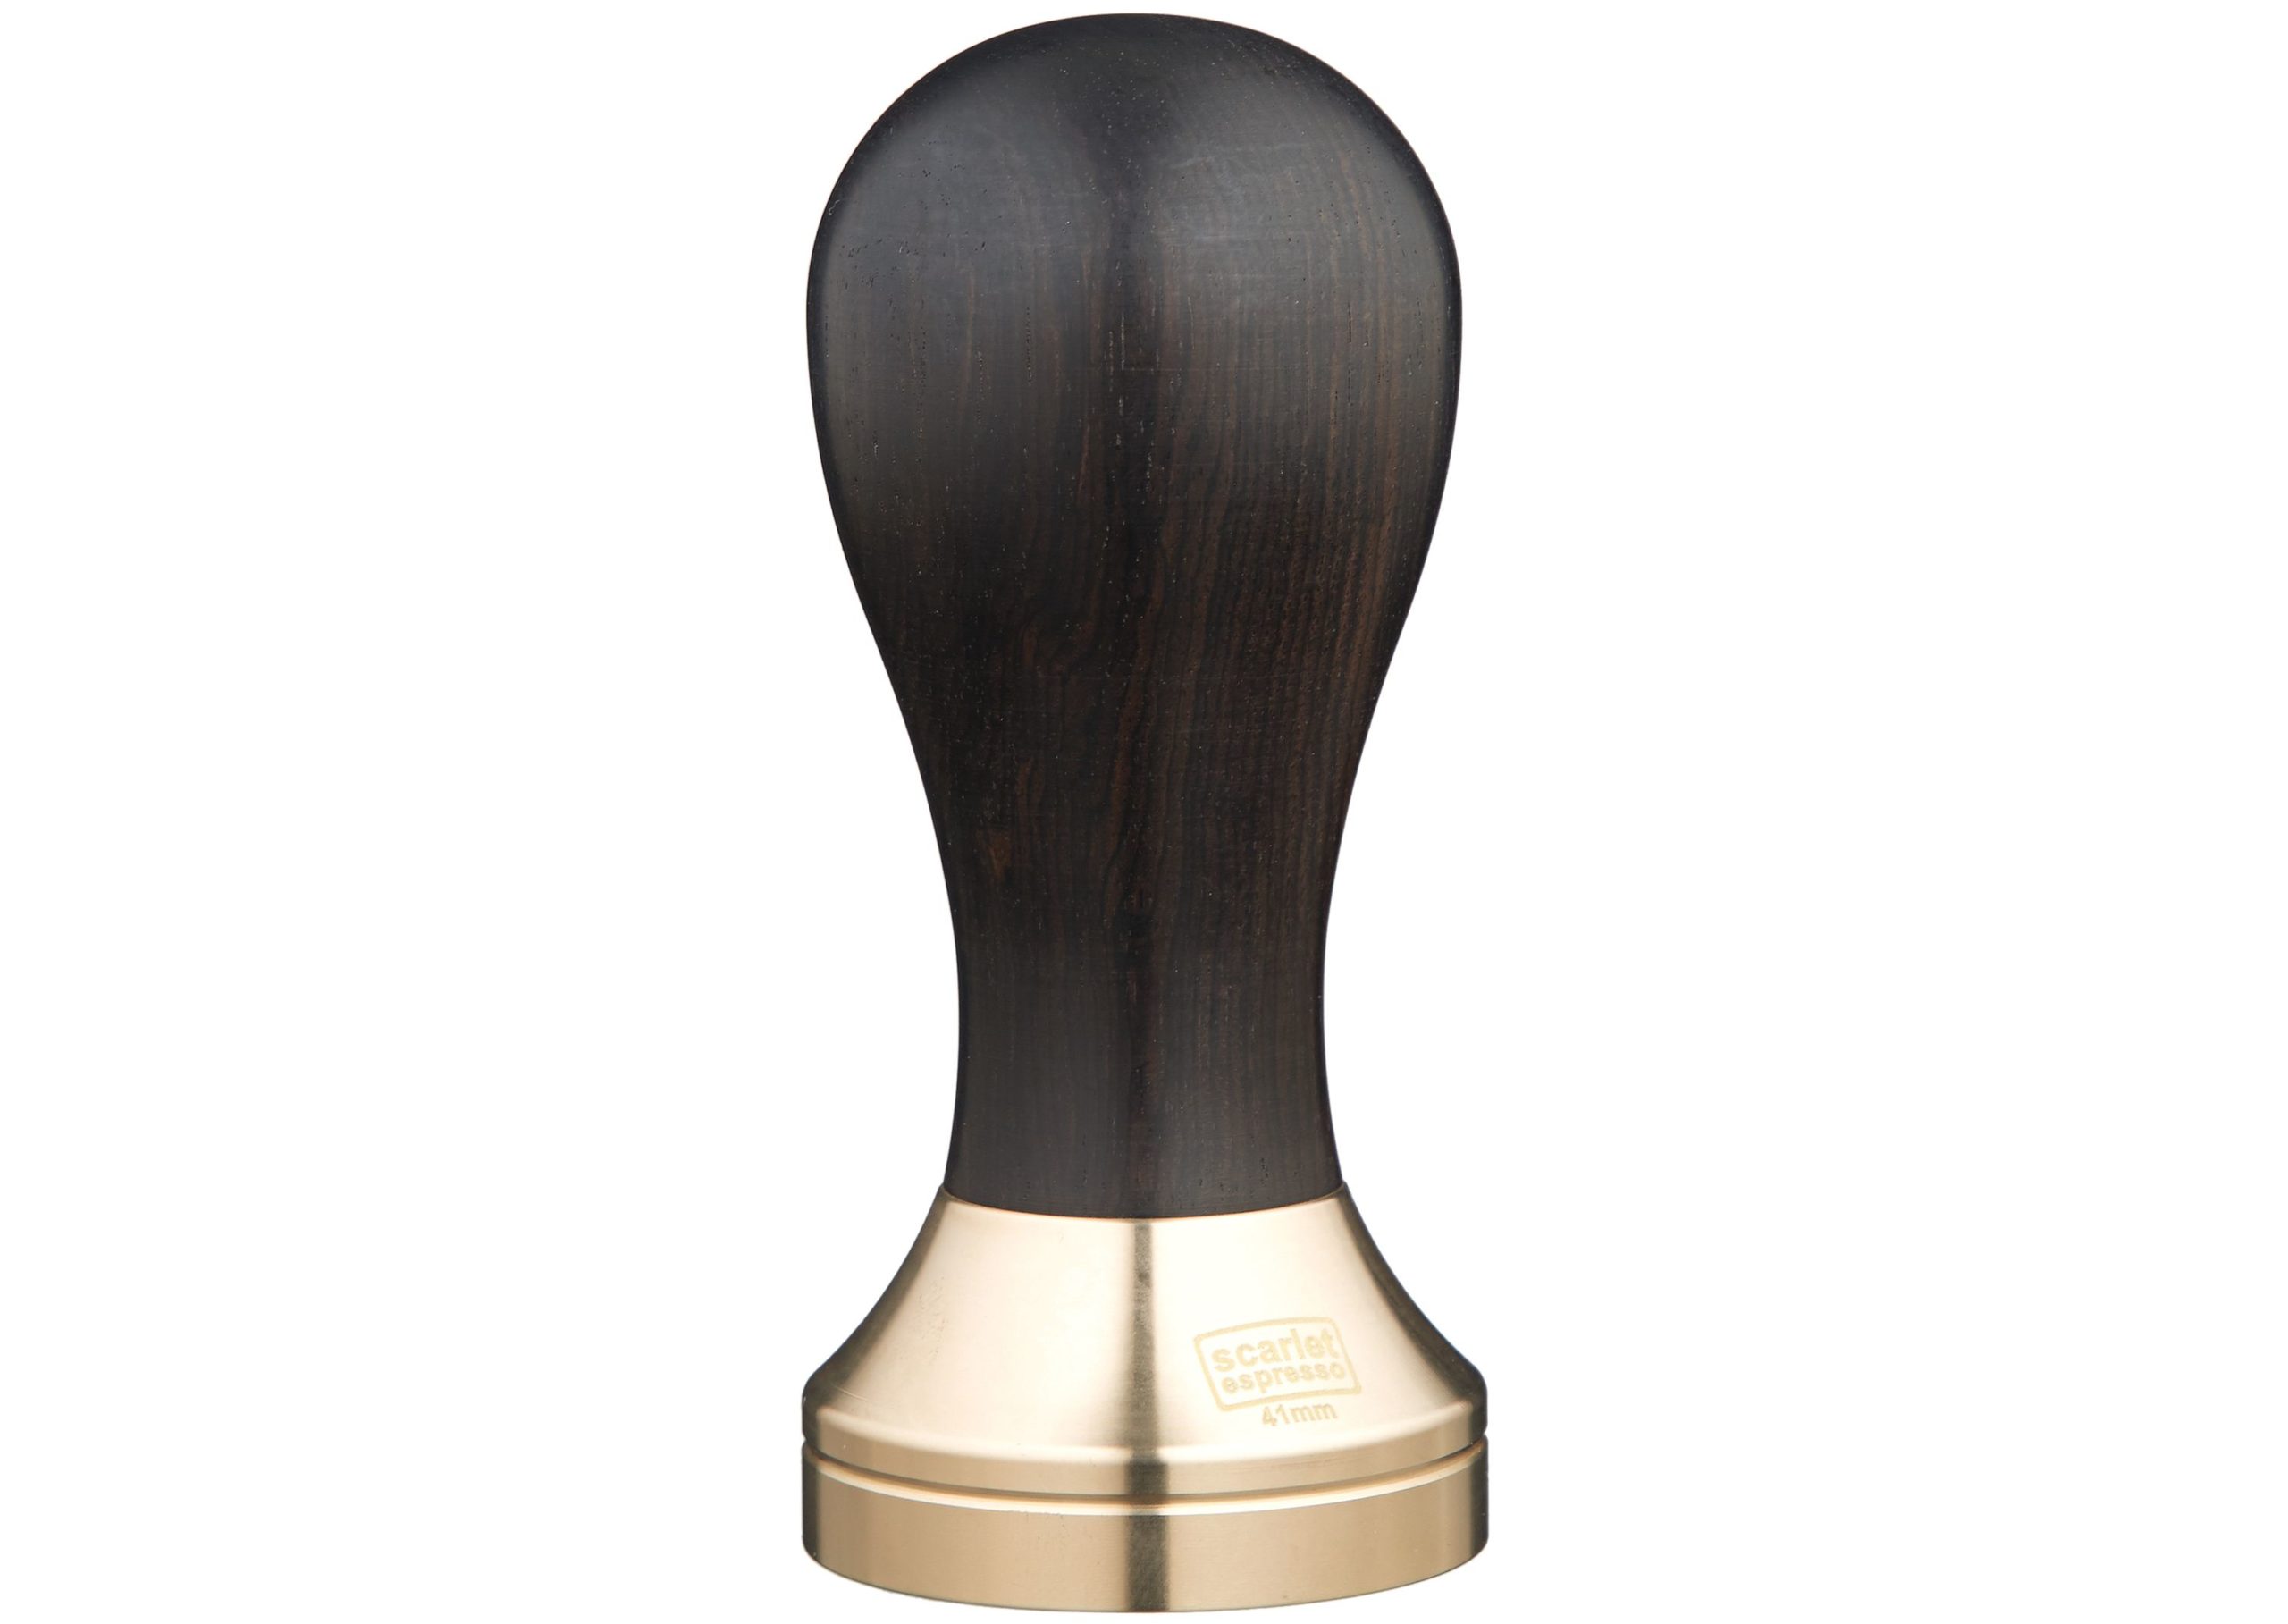 41mm Scarlet Classic Espresso Tamper 58 mm 51 mm 41 mm with Brown and Black Wood Handle for Portafilter Machines 49 mm, Brown brown 